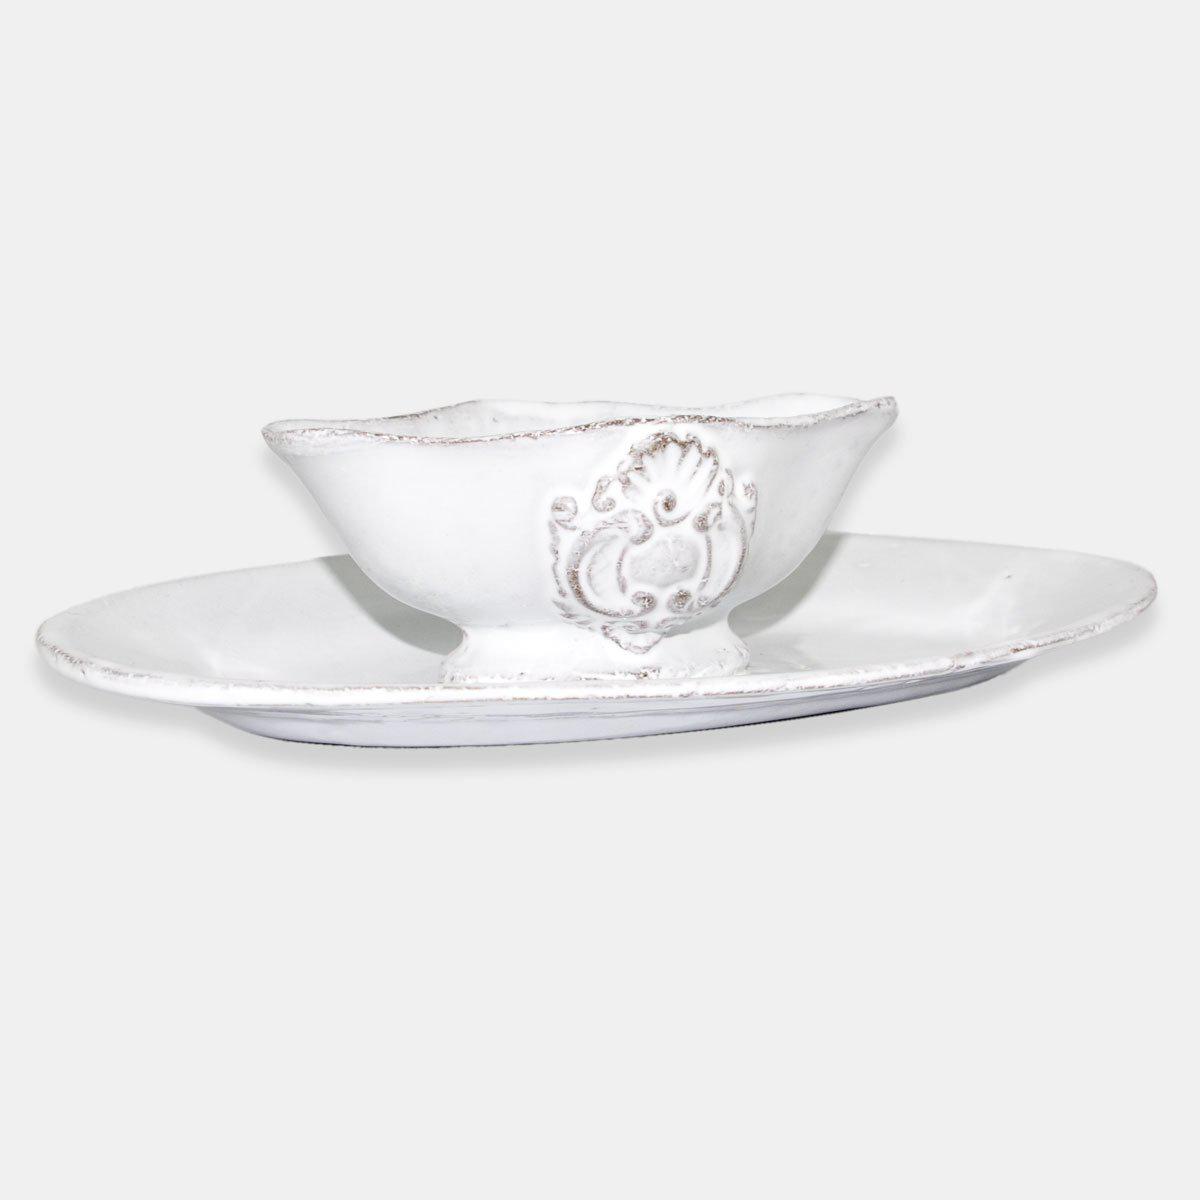 Charles gravy boat with saucer-20x14x5,3cm-Handmade in France by CARRON